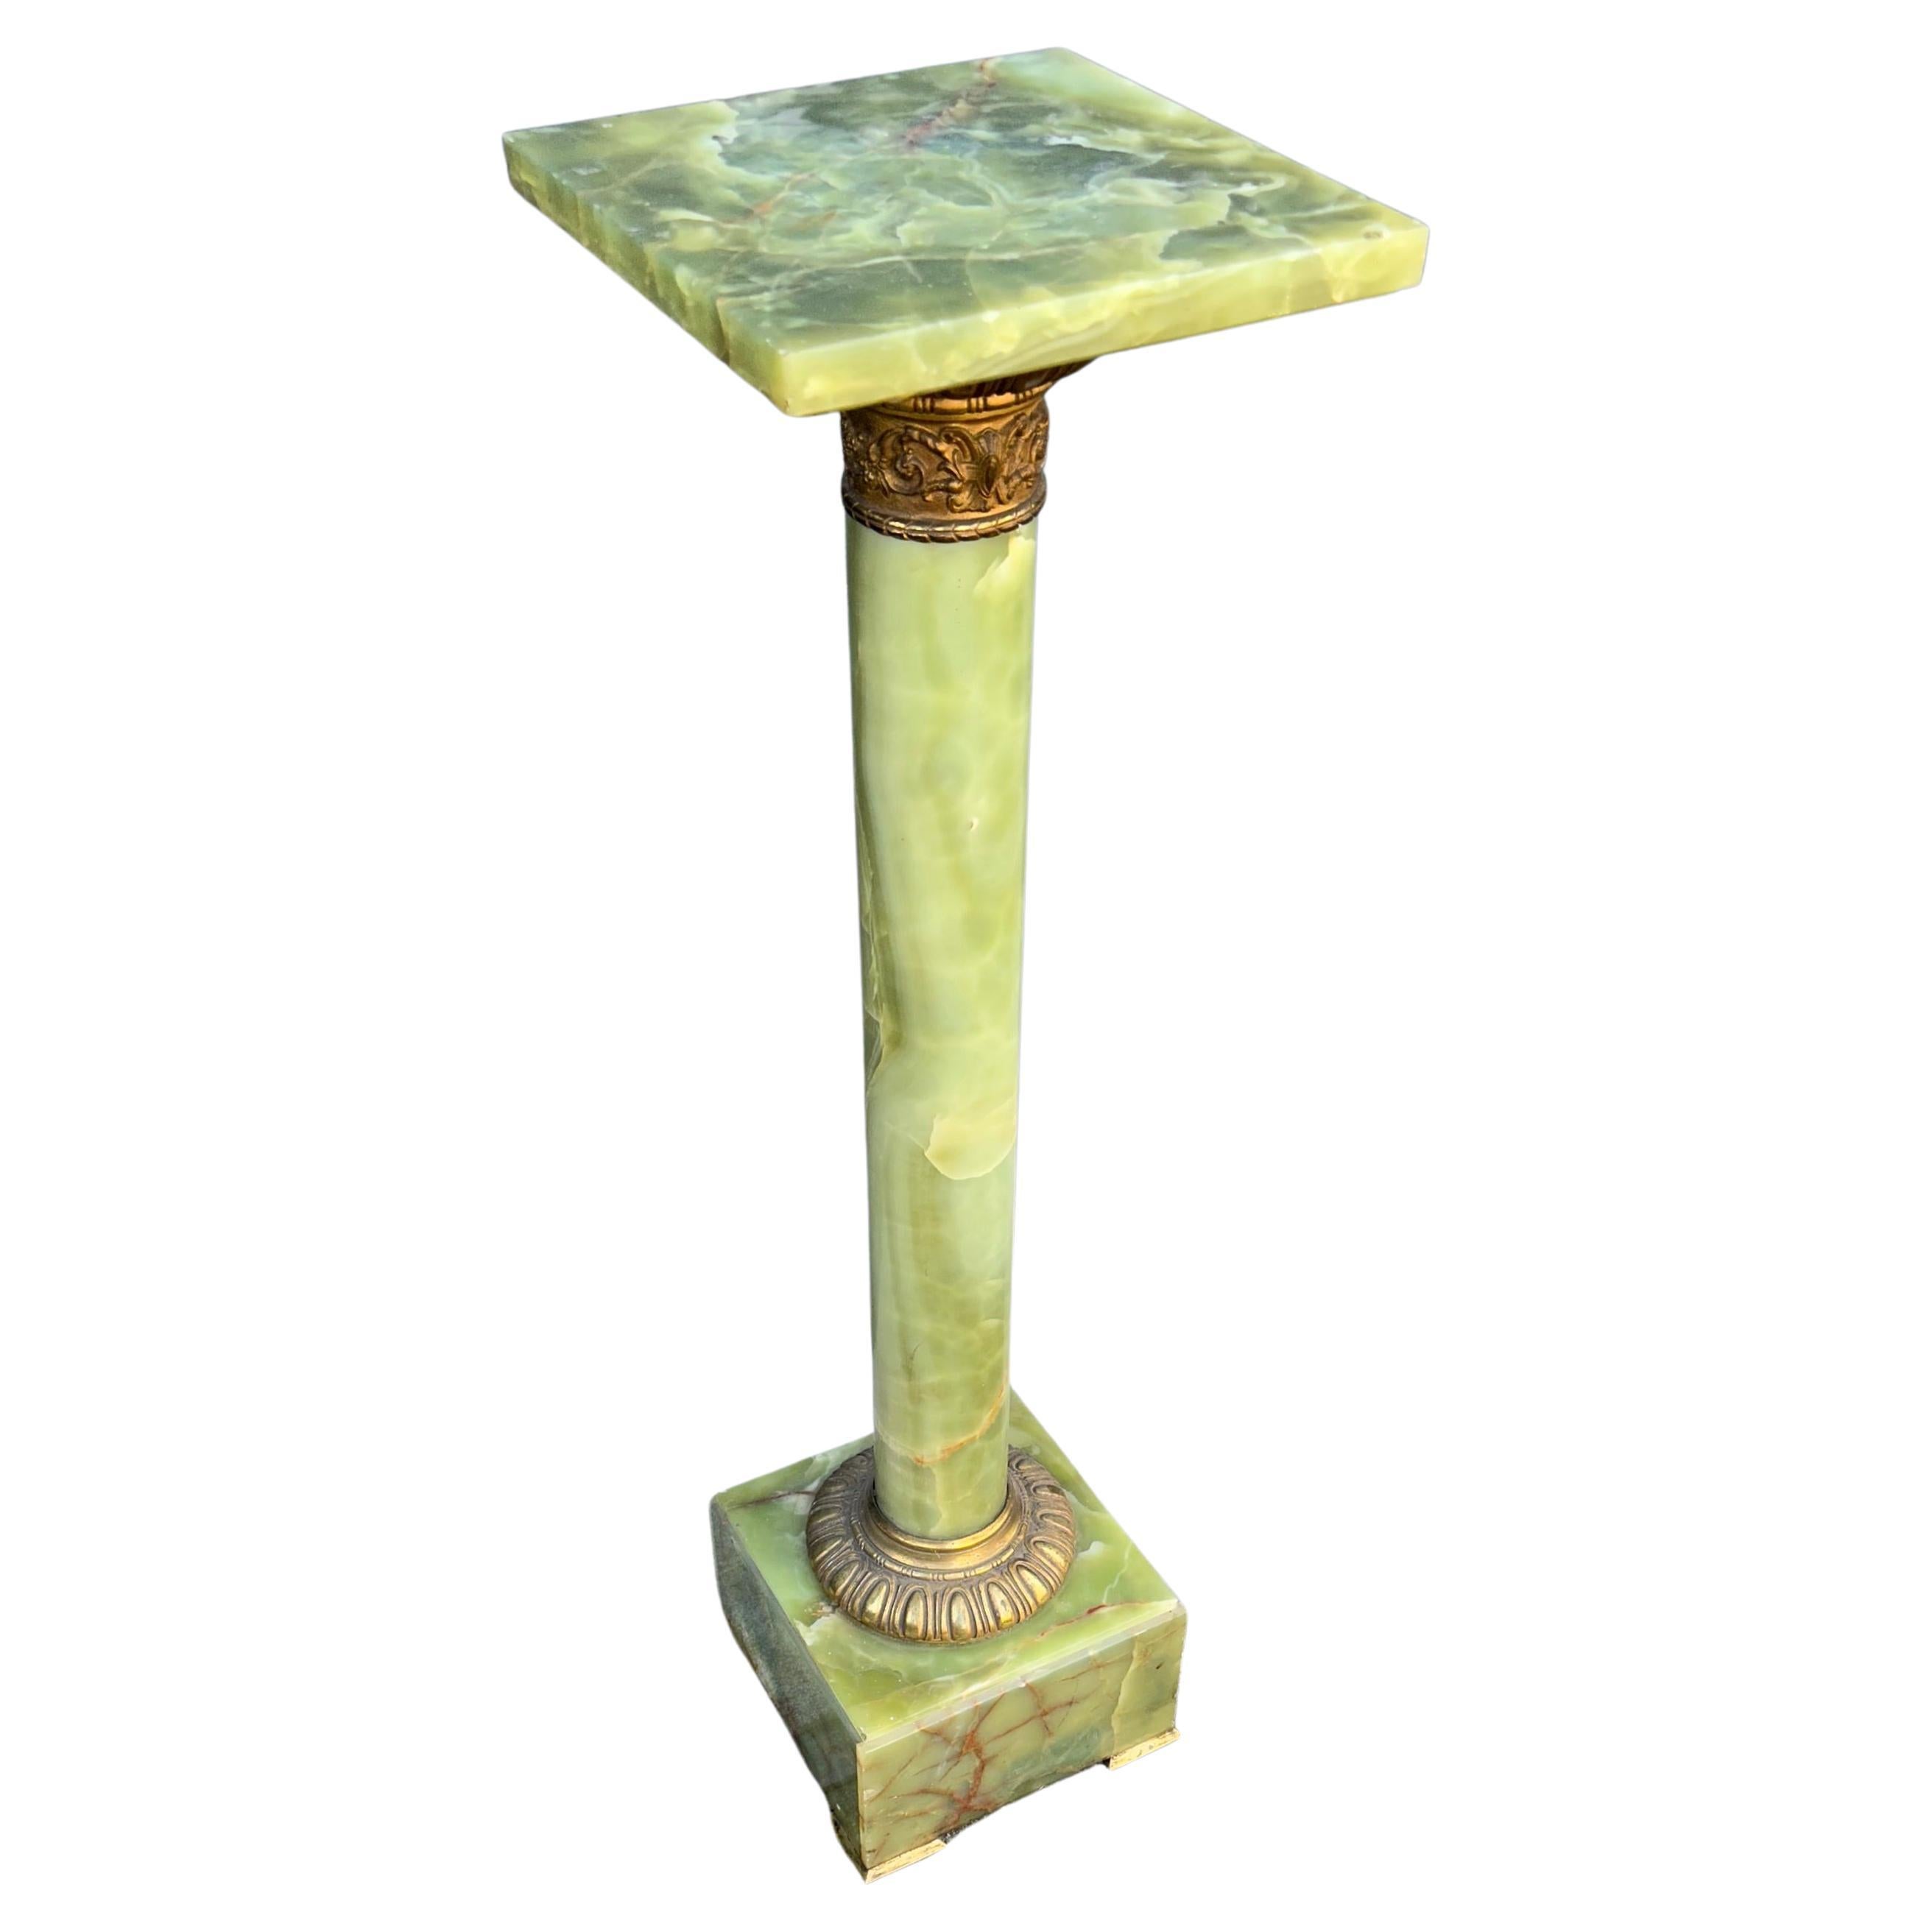 Stylish & Majestic Looking Antique, Green Onyx and Bronze Column Pedestal Stand